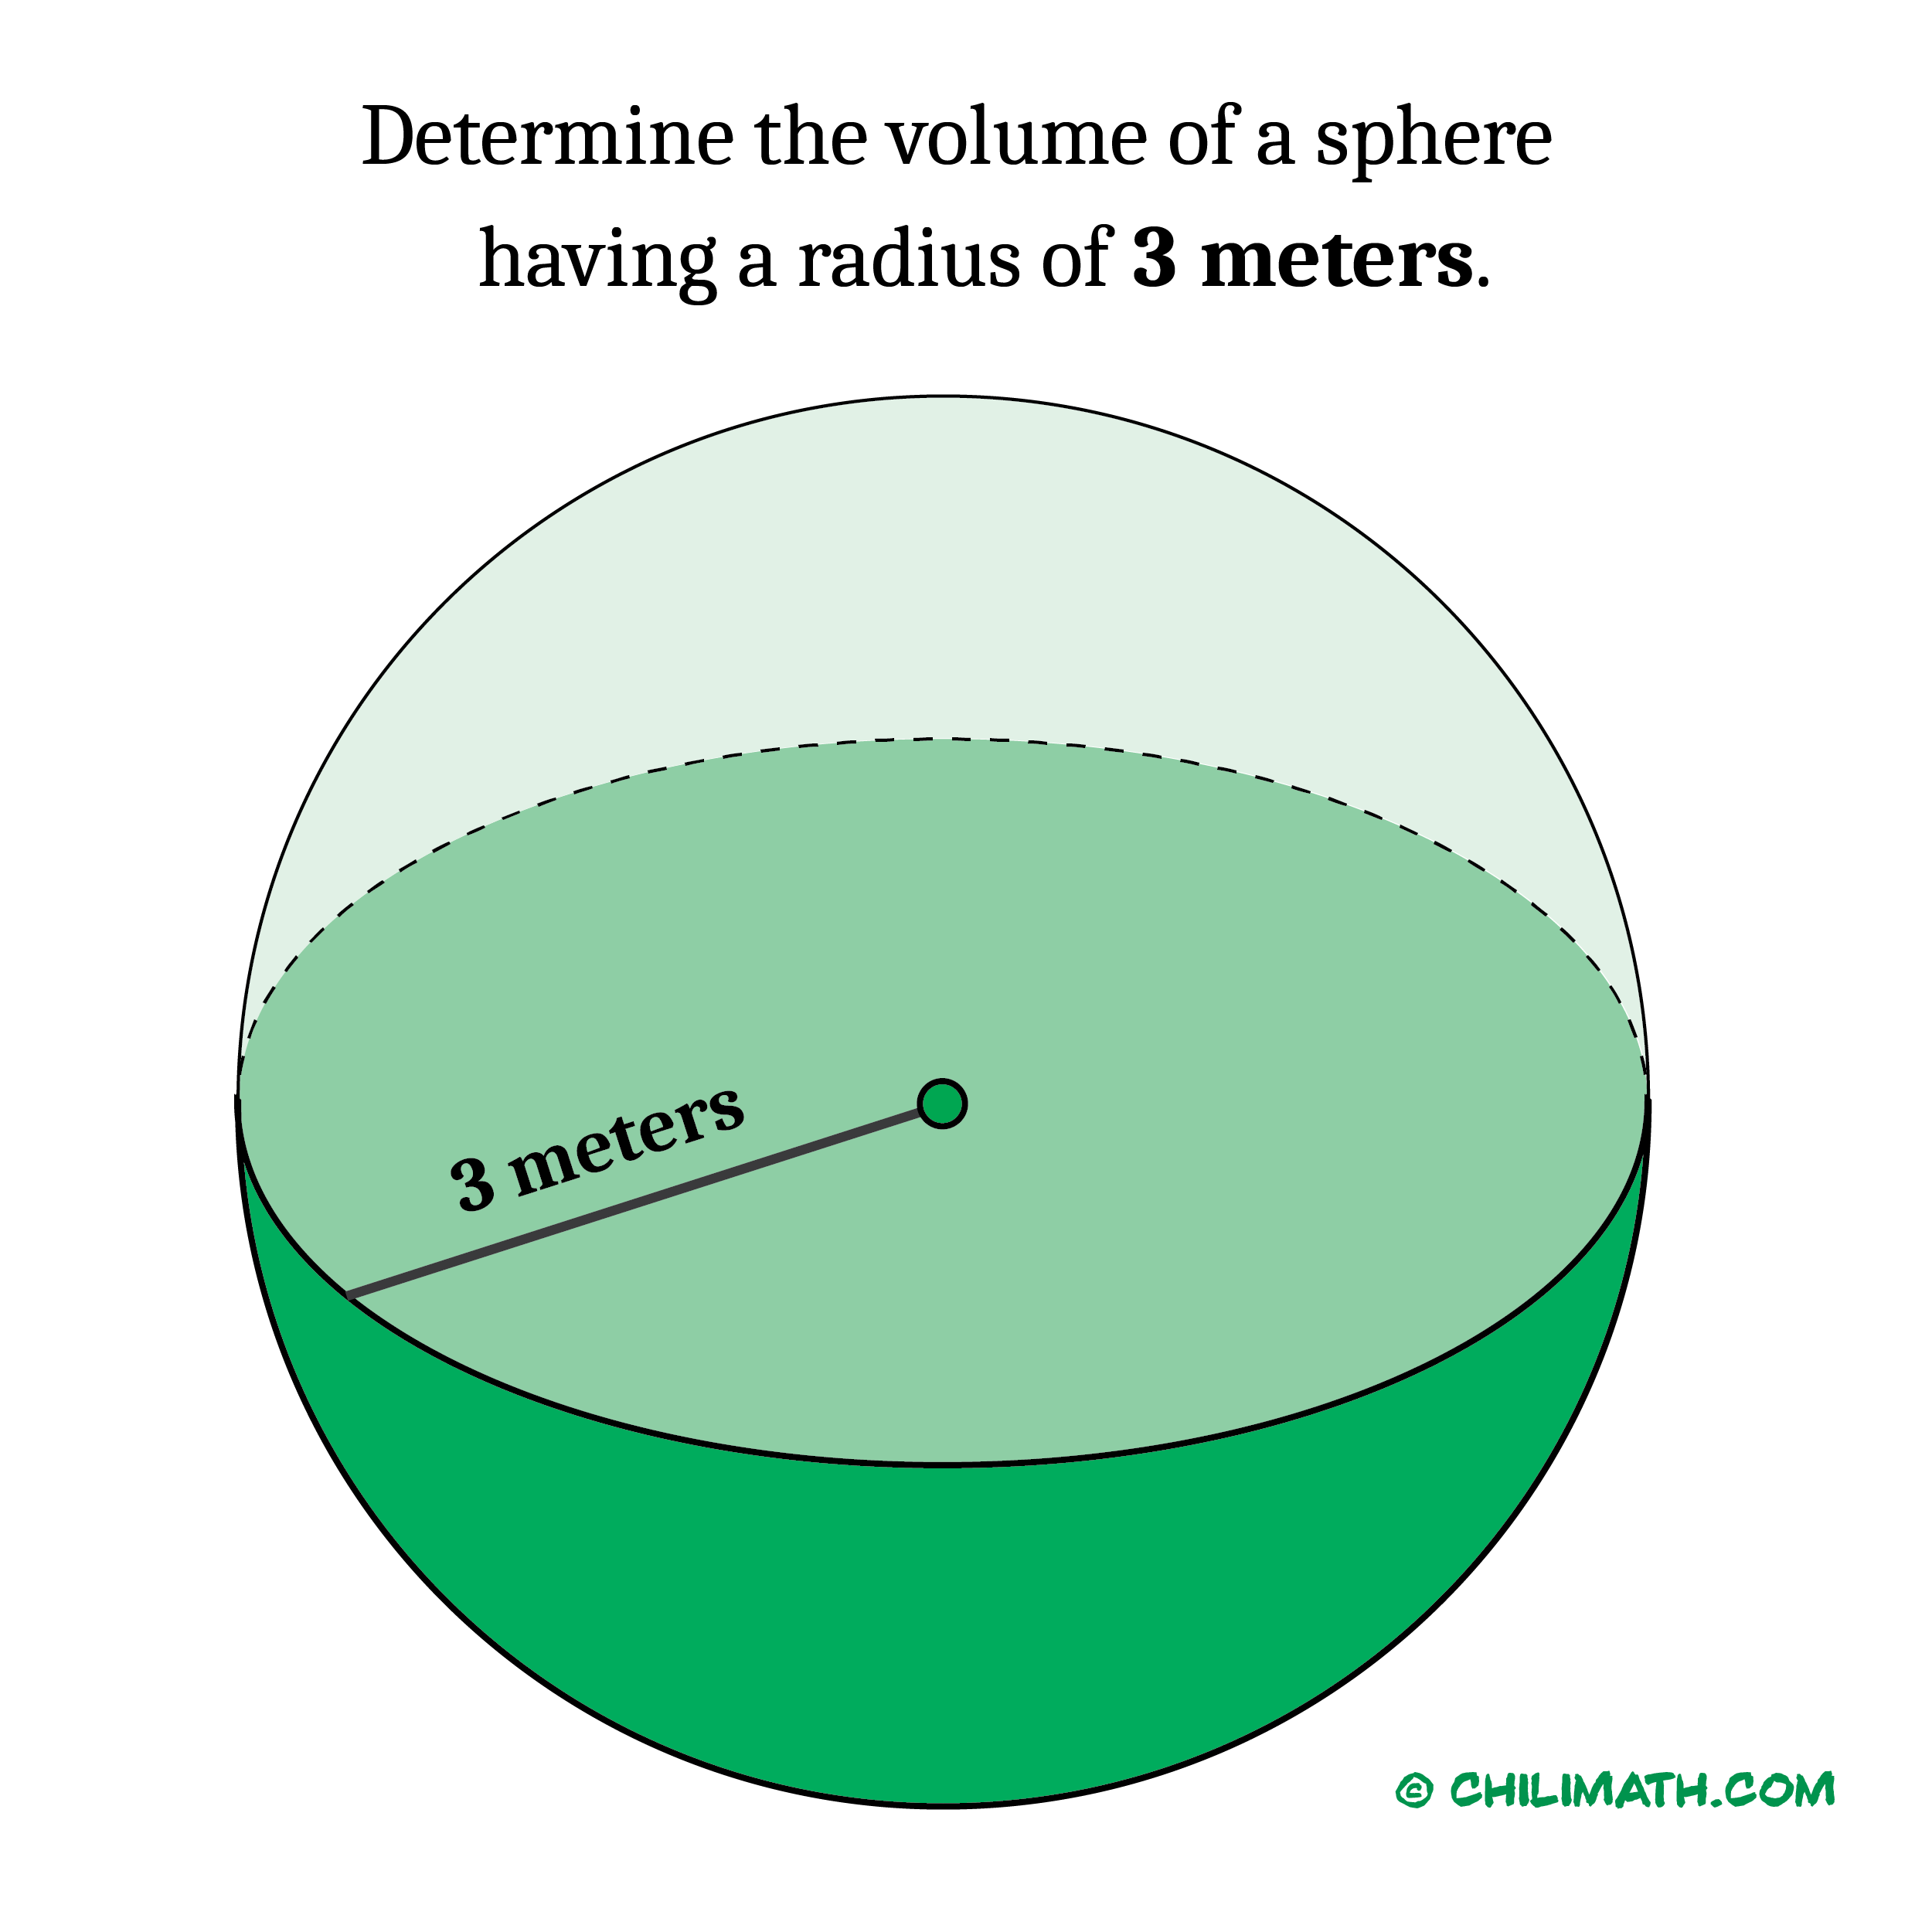 a green sphere that has a radius of 3 meters